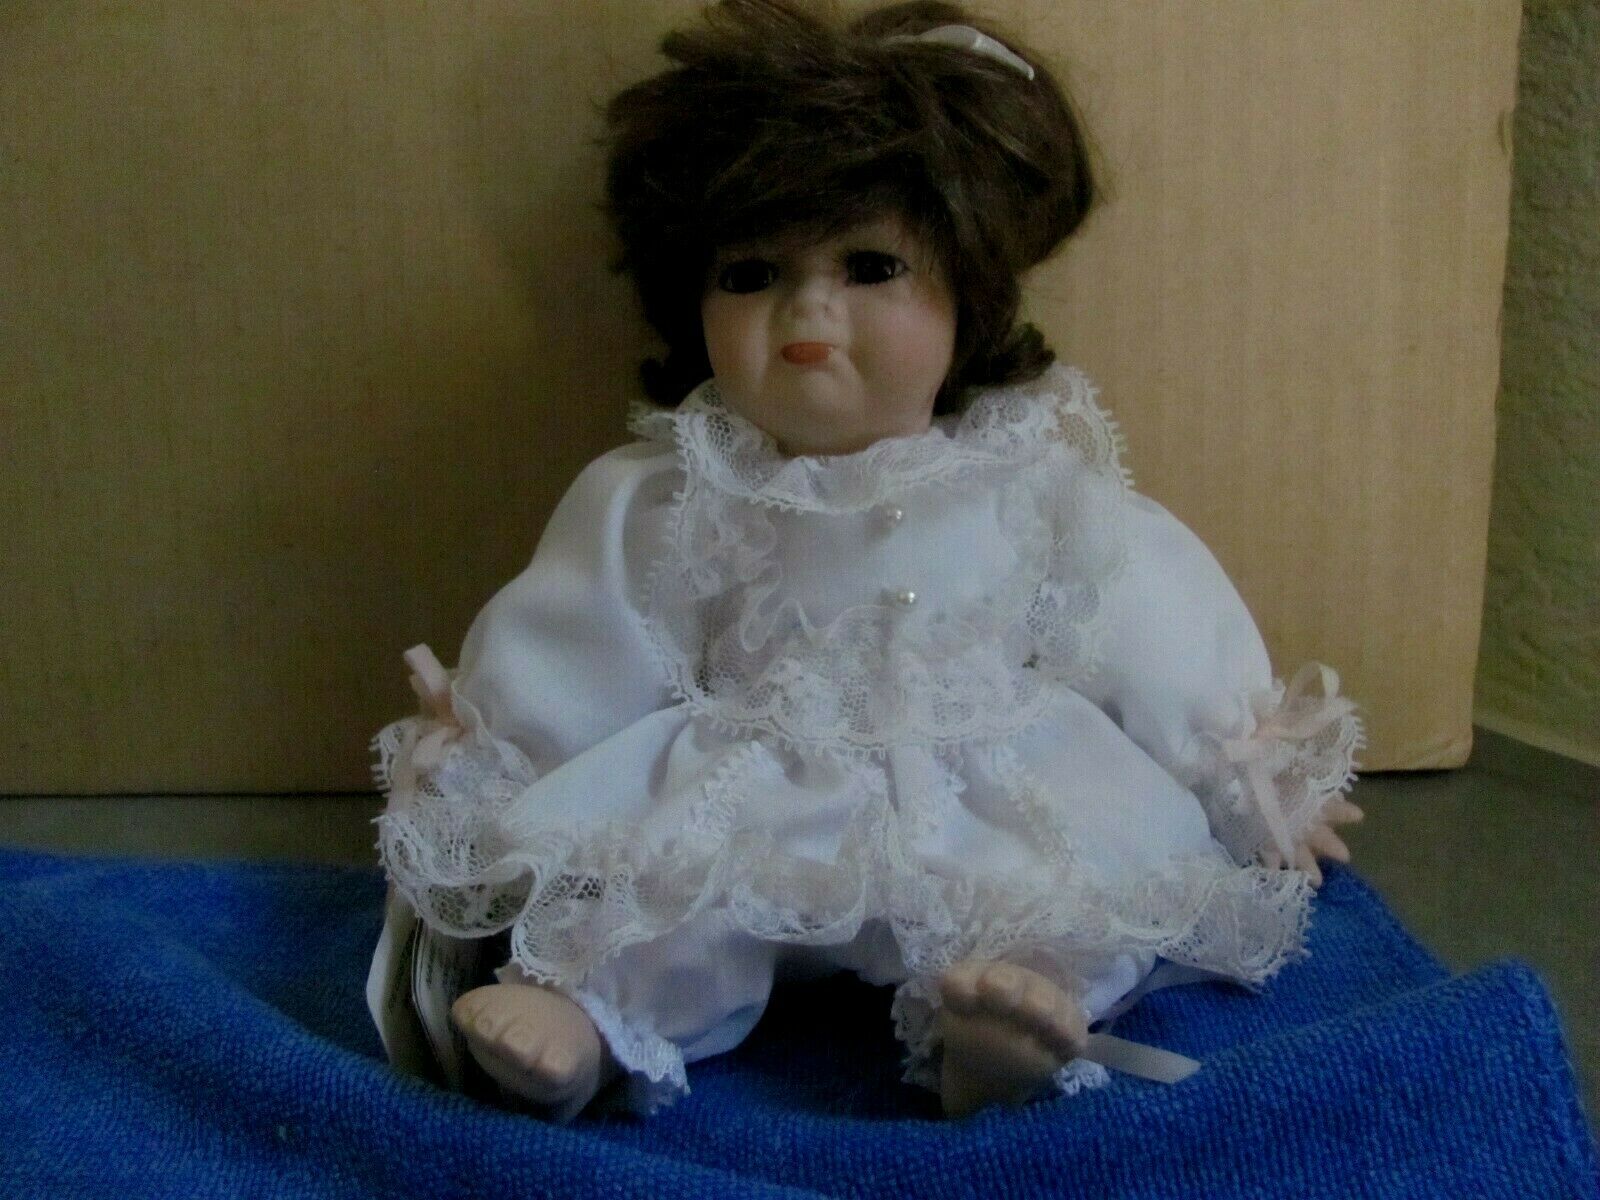 Fritz's Basket Babies 8" Porcelain Doll Signed And With Tags, Amy 2000